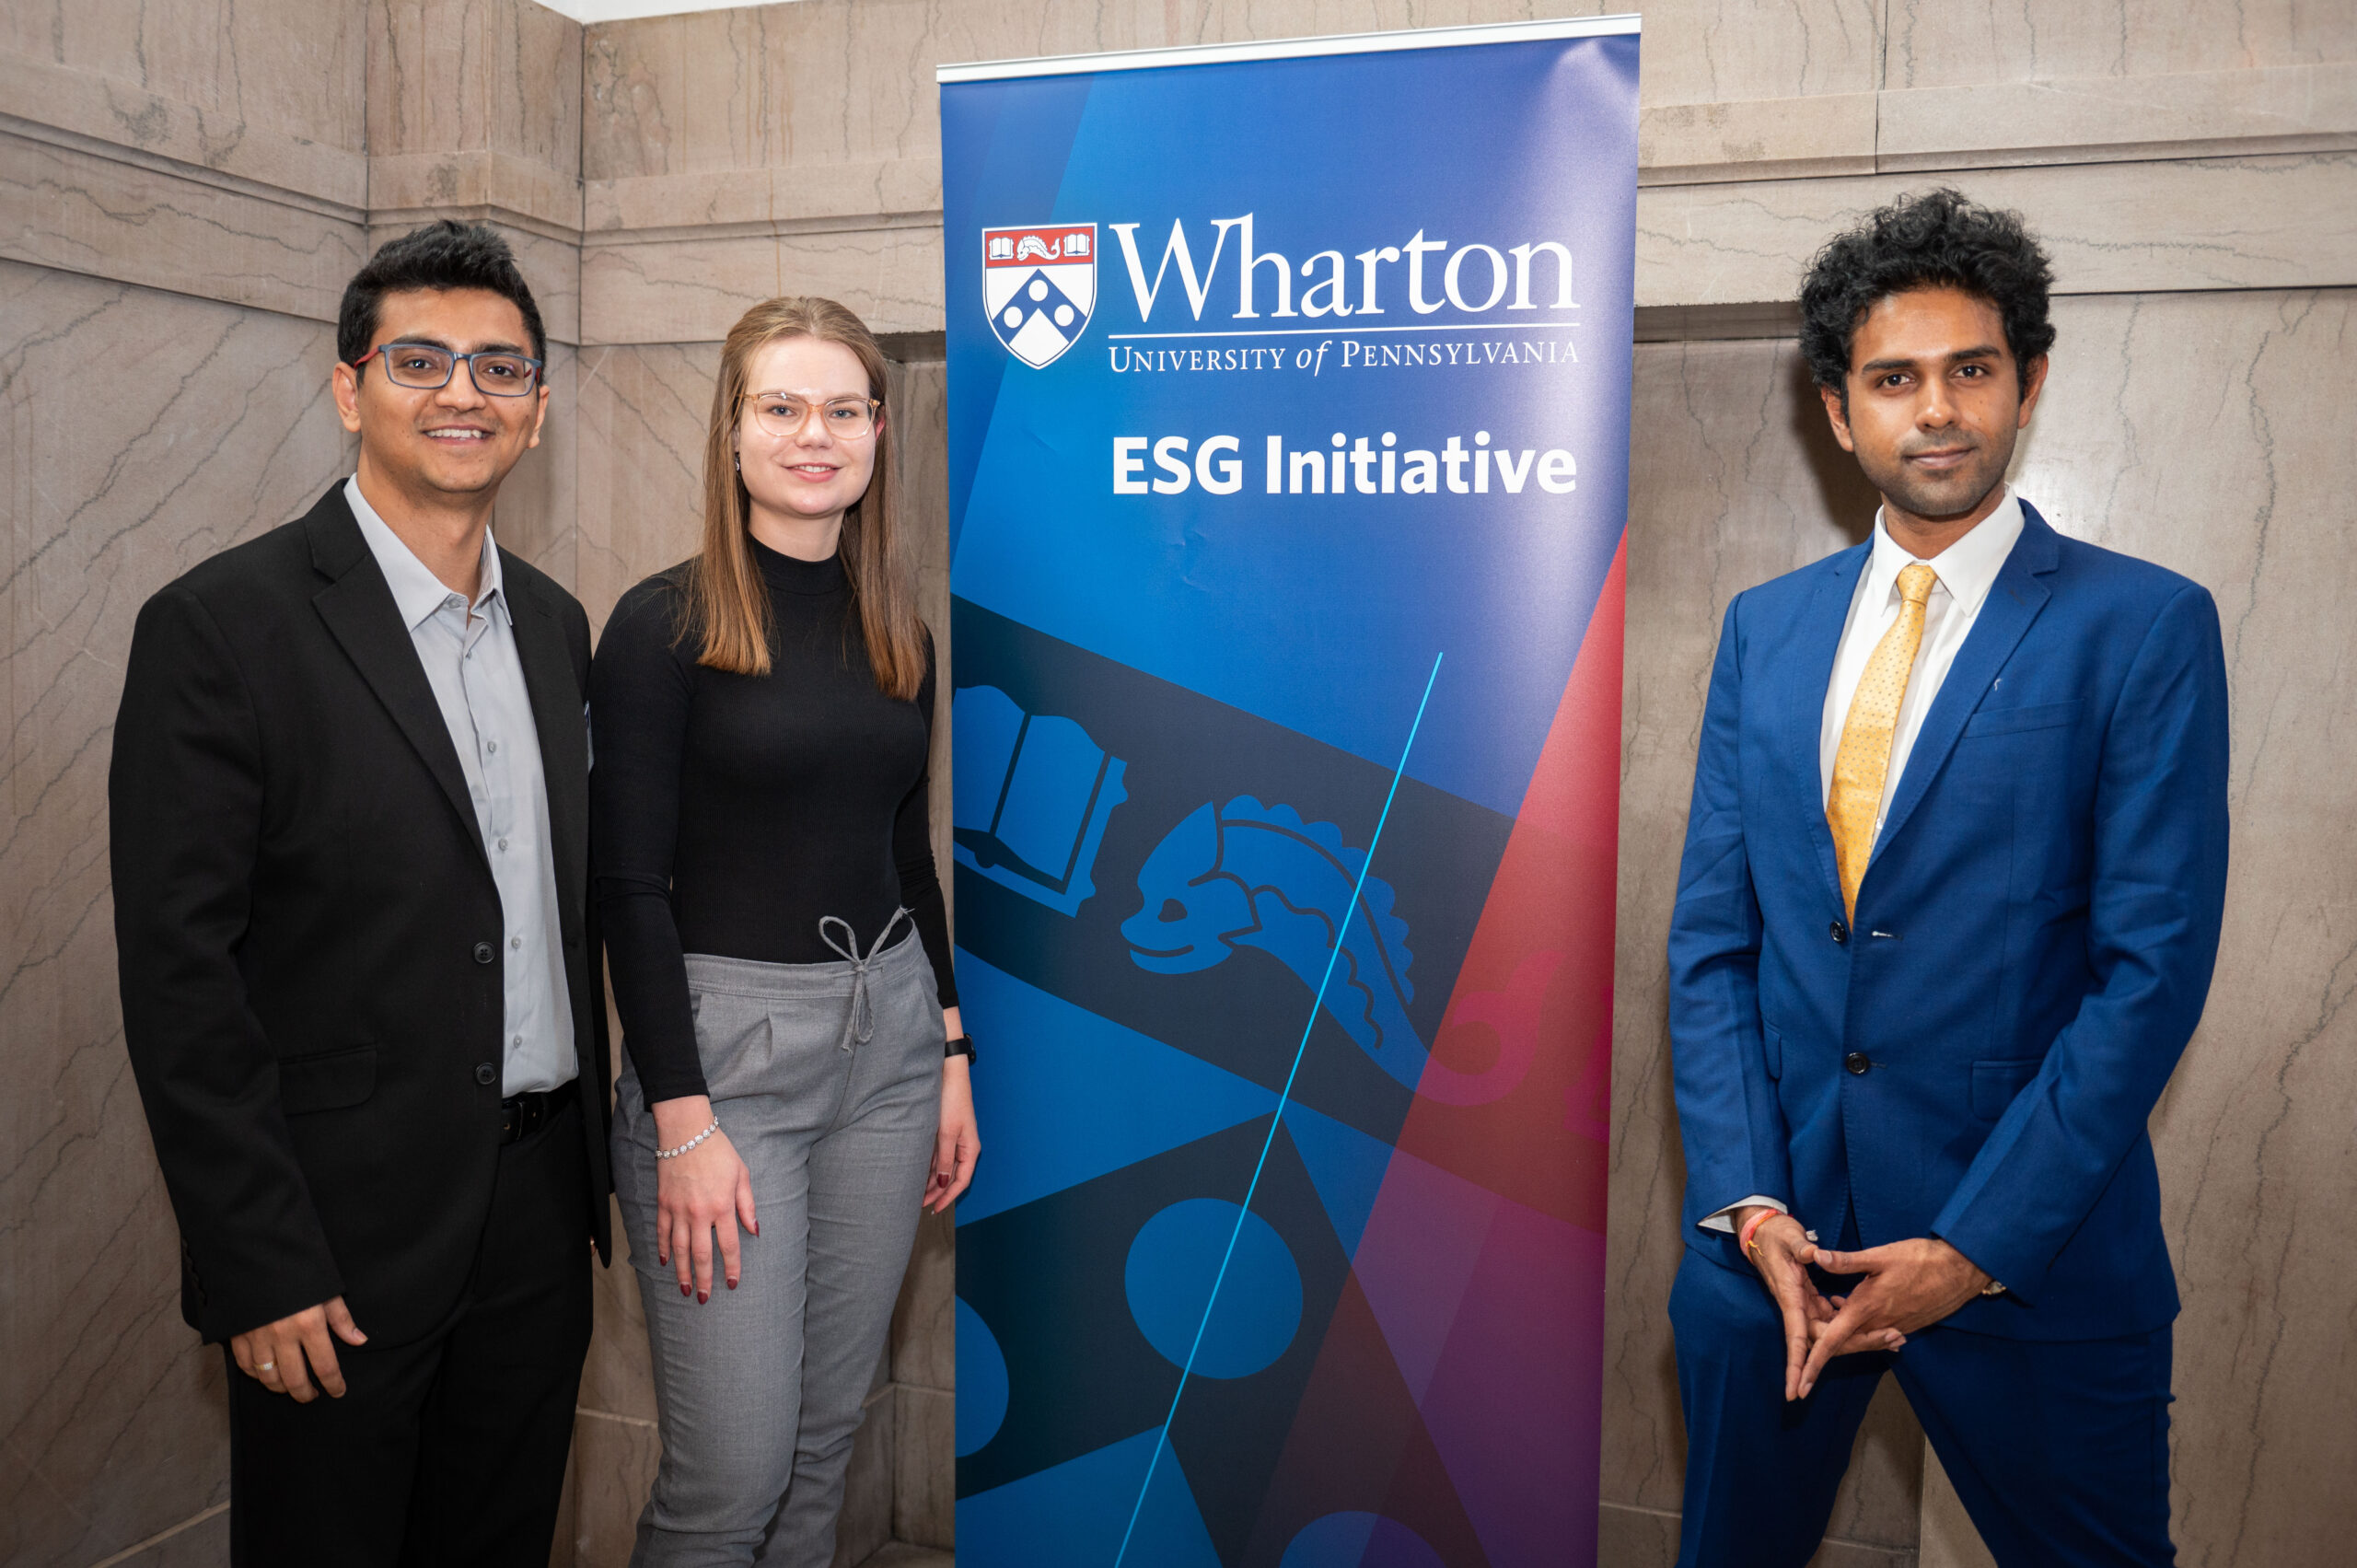 Three members of the Fletcher School at Tufts University team pose in professional attire next to a banner that reads "Wharton ESG Initiative"